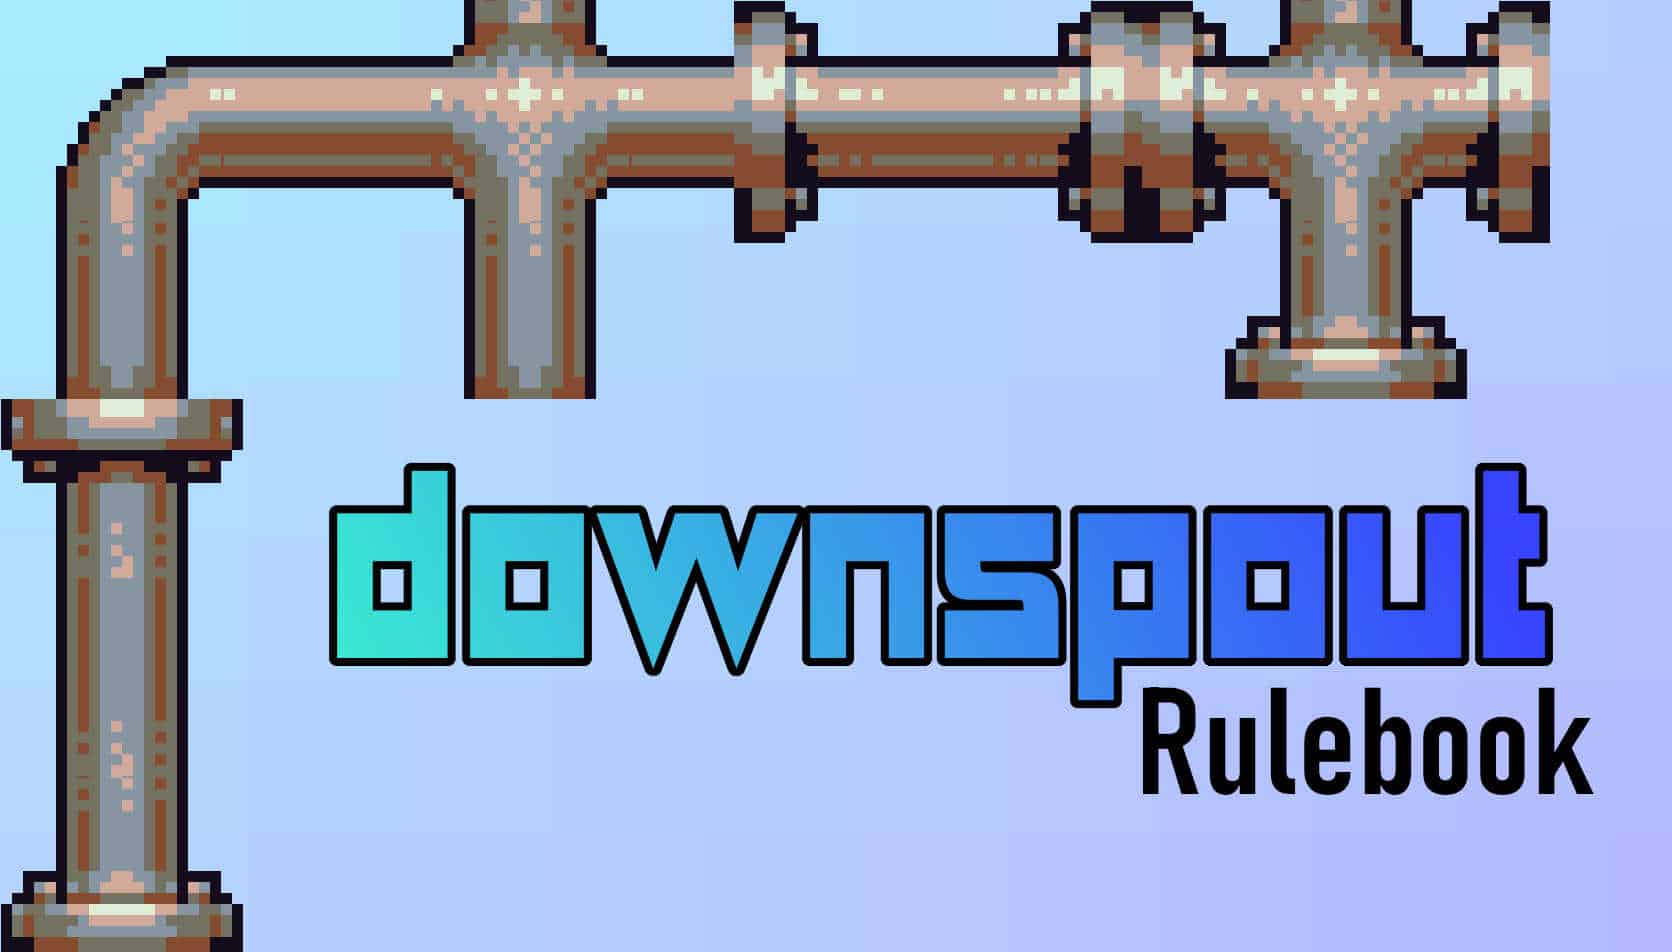 Downspout rulebook title